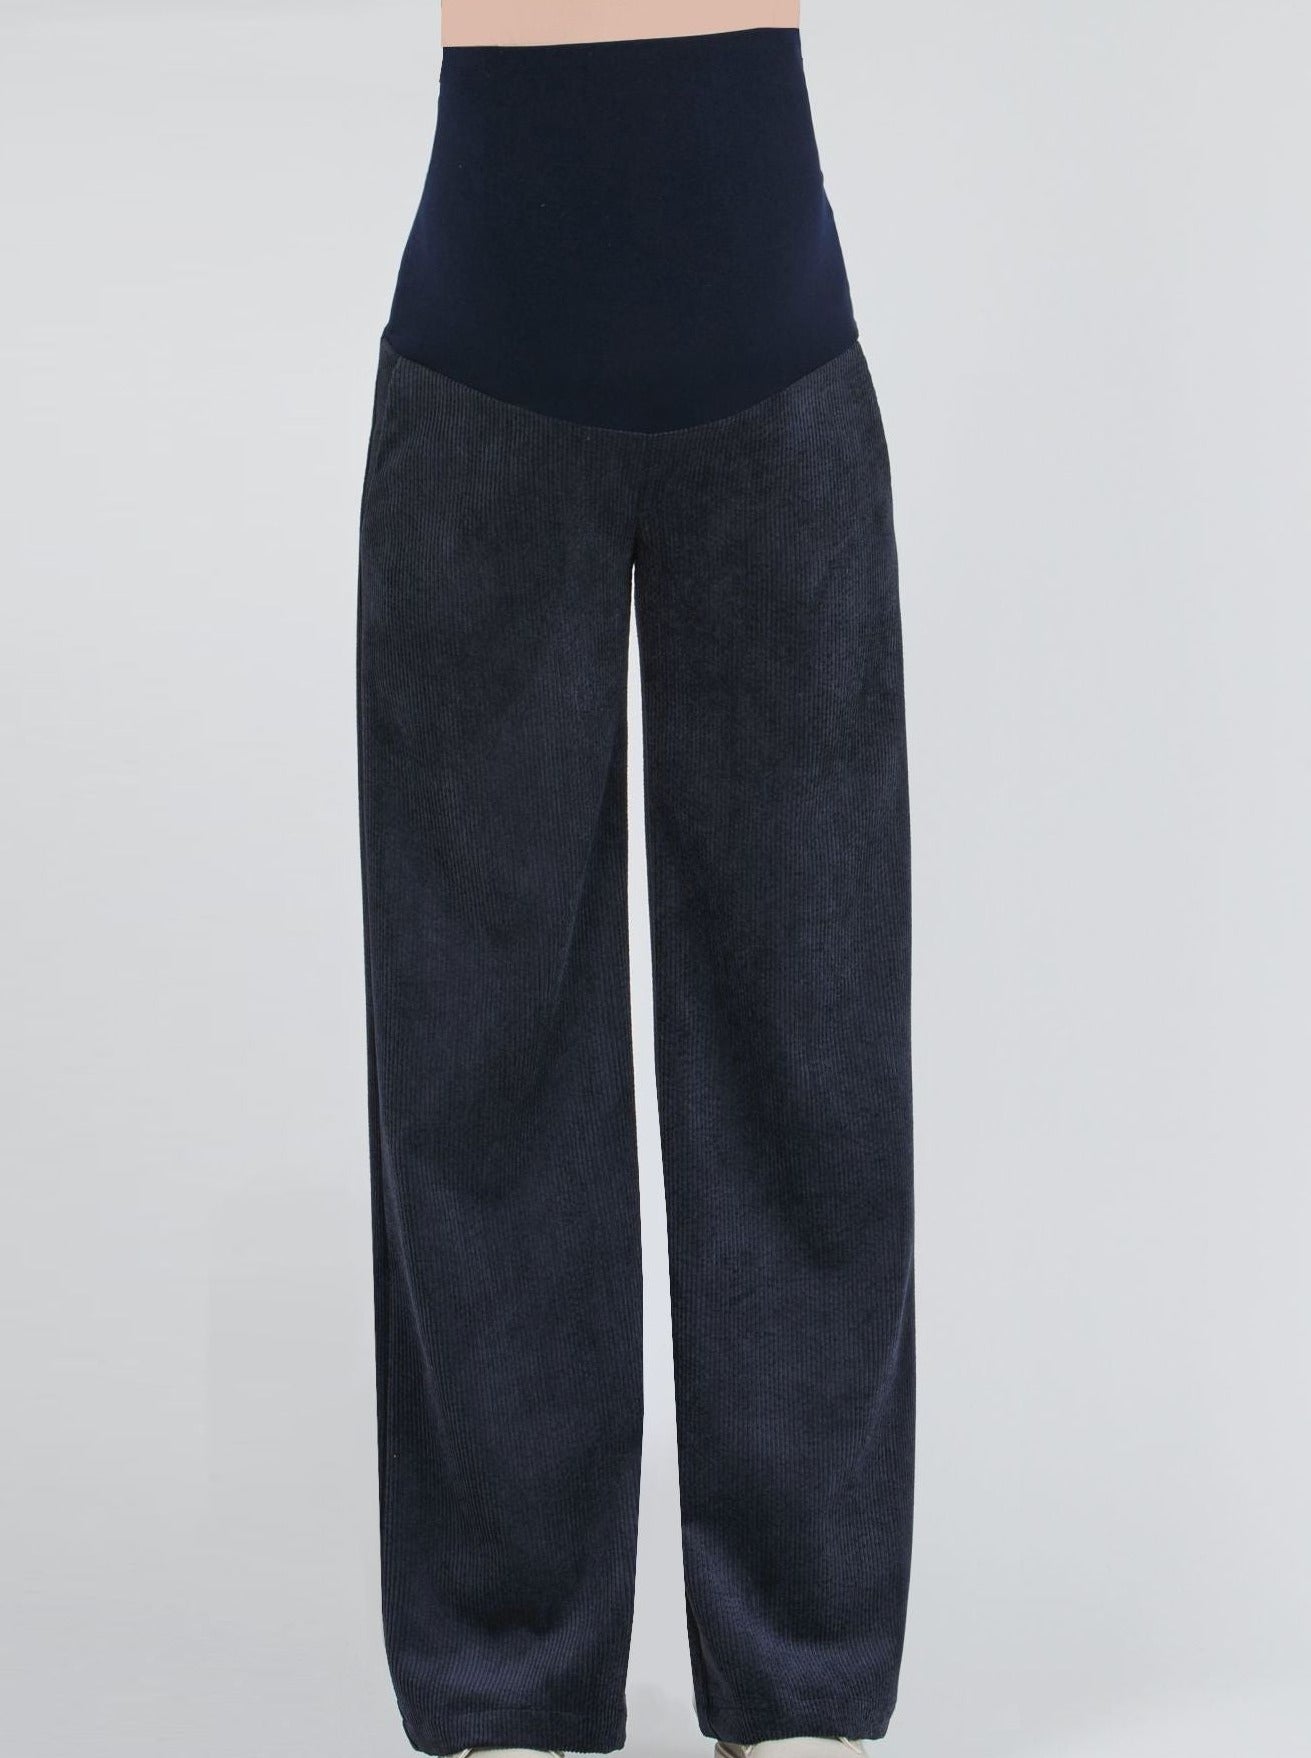 Willy corduroy maternity pants